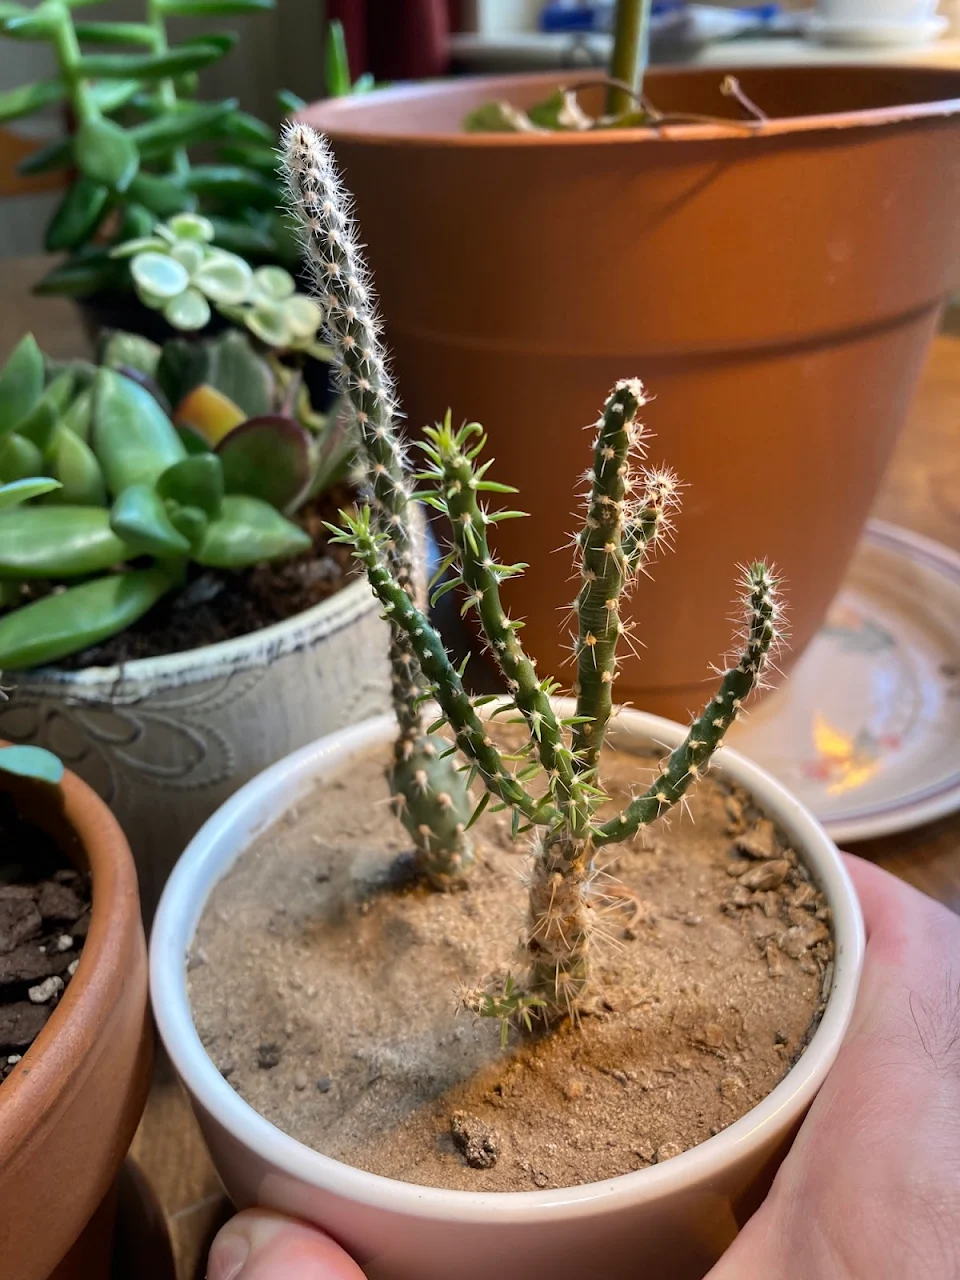 My cholla cactus is growing new arms!